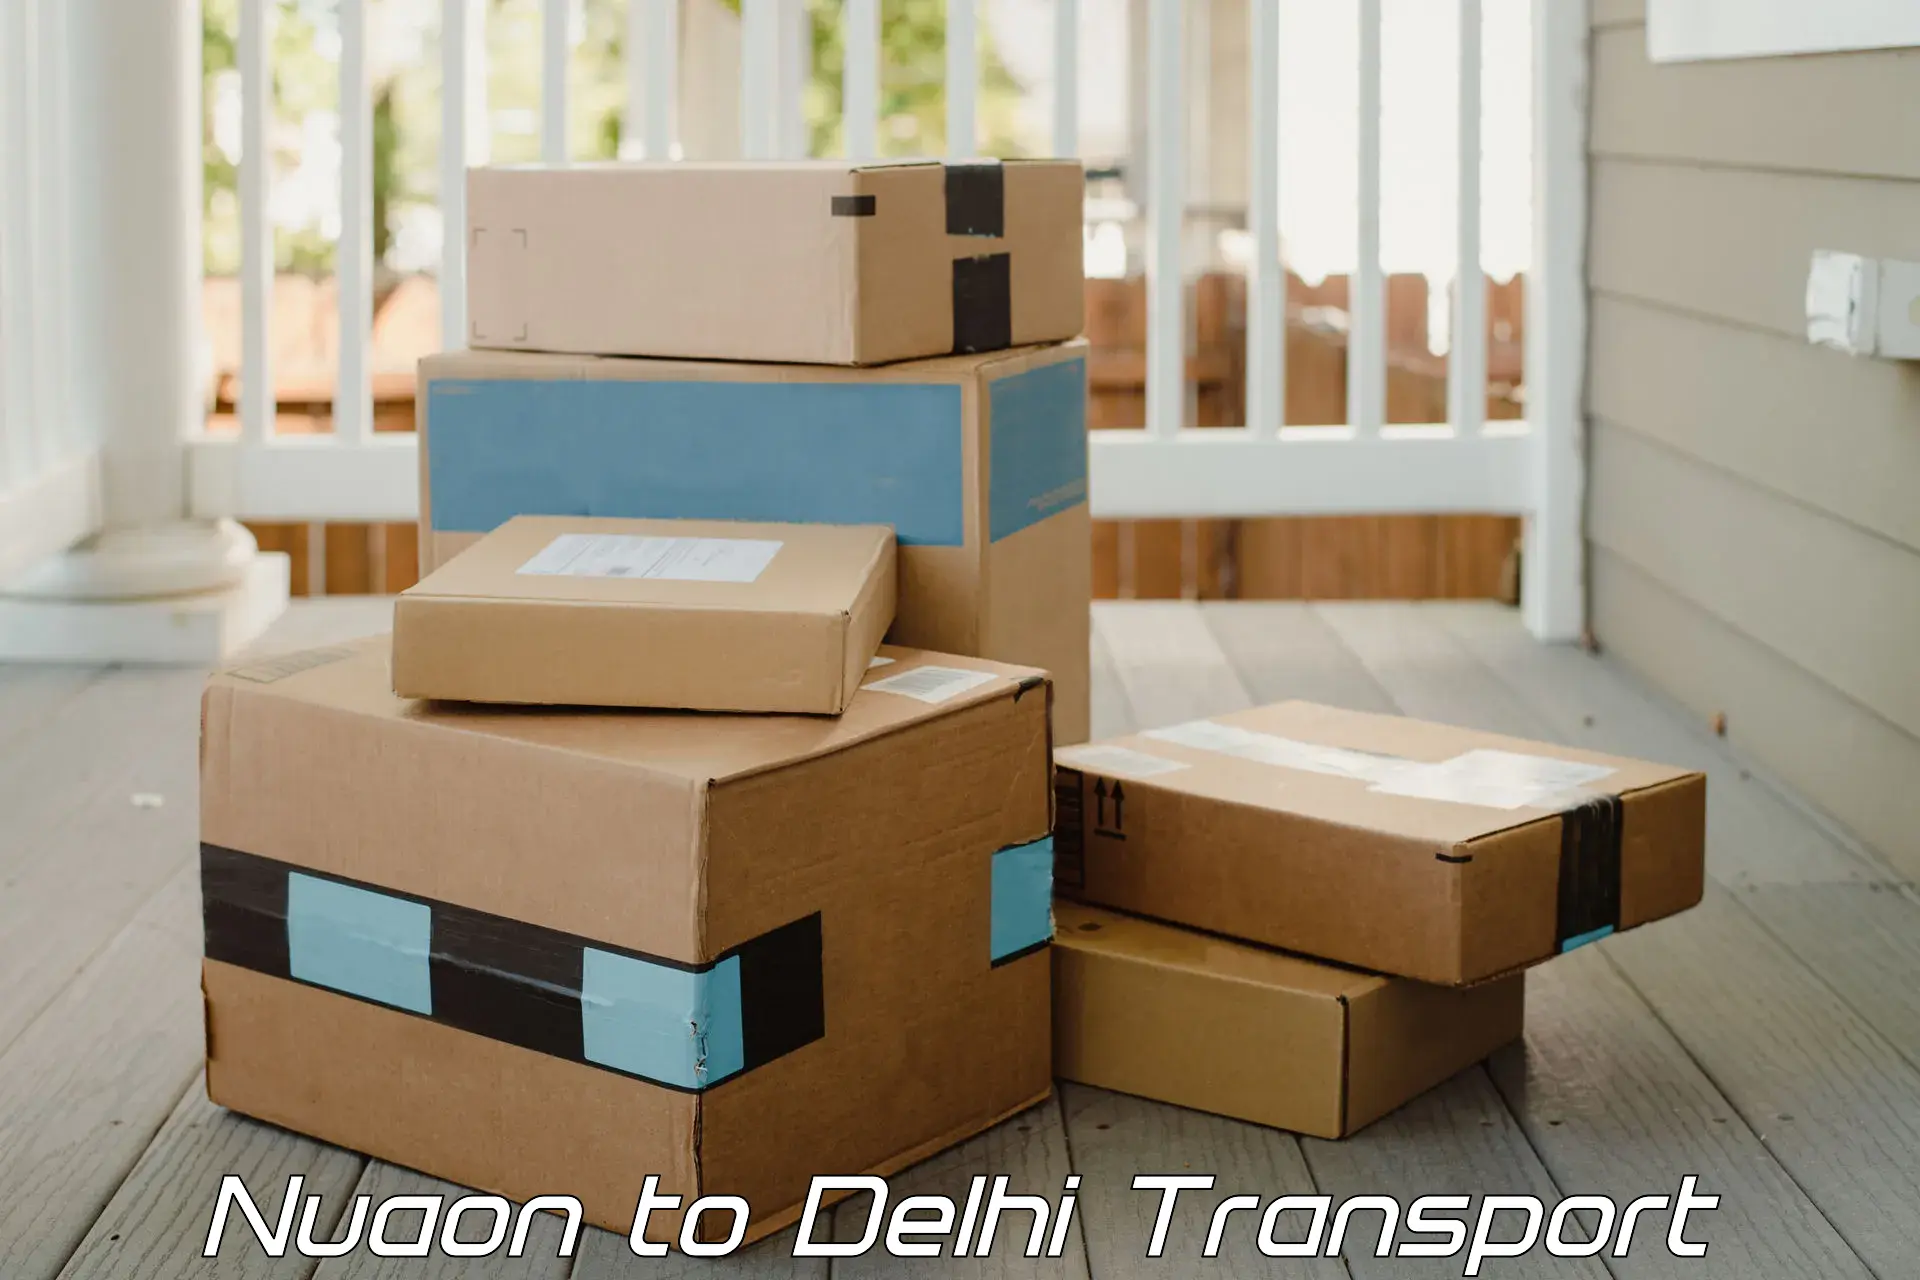 Interstate transport services Nuaon to NCR